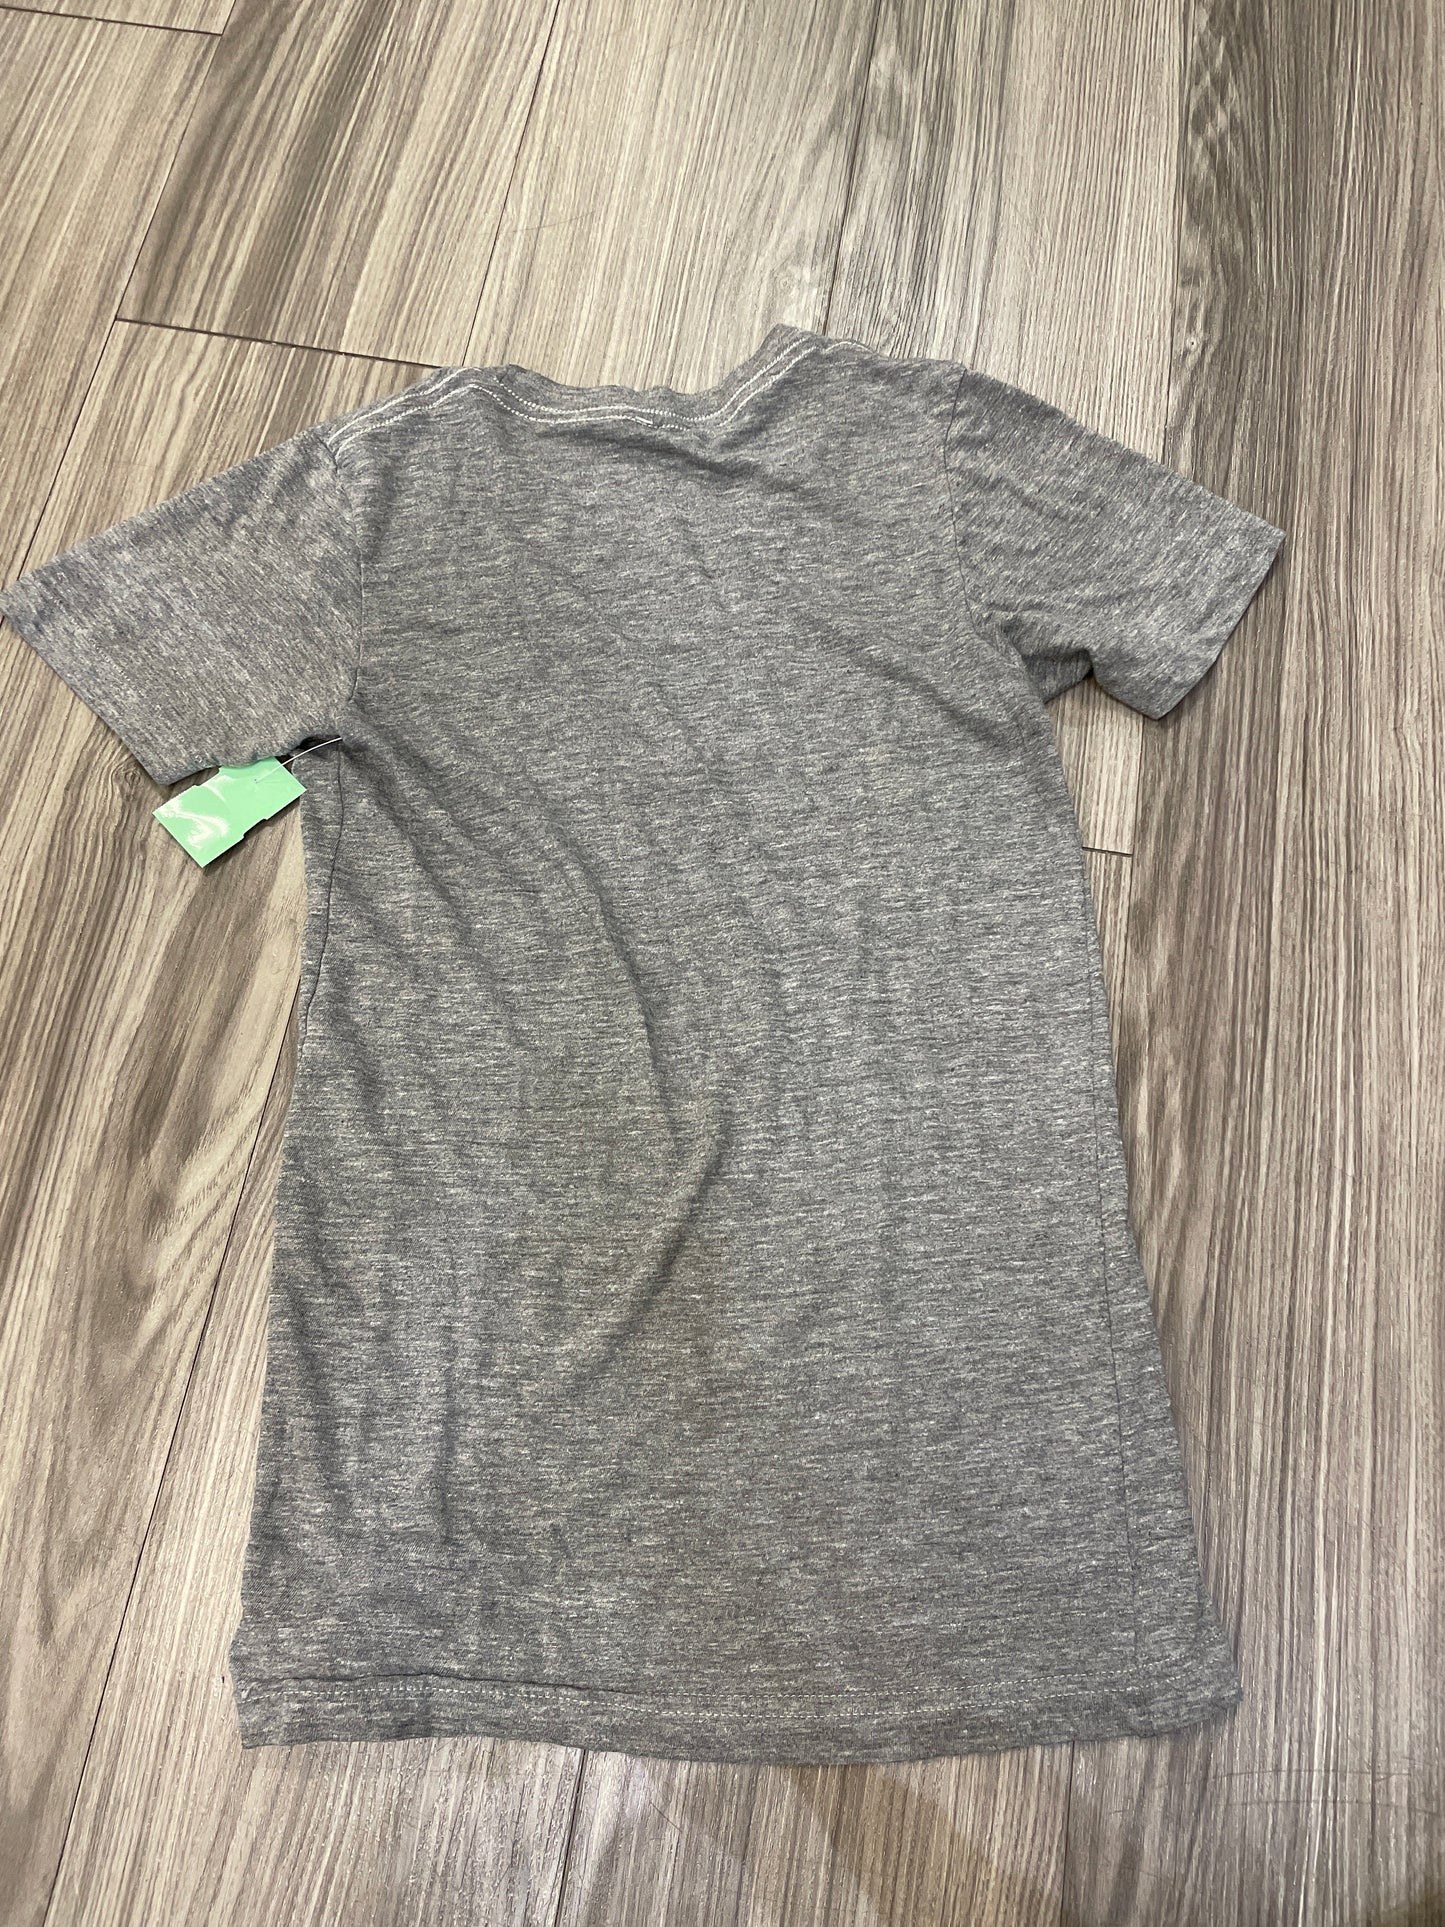 Grey Top Short Sleeve Clothes Mentor, Size Xs